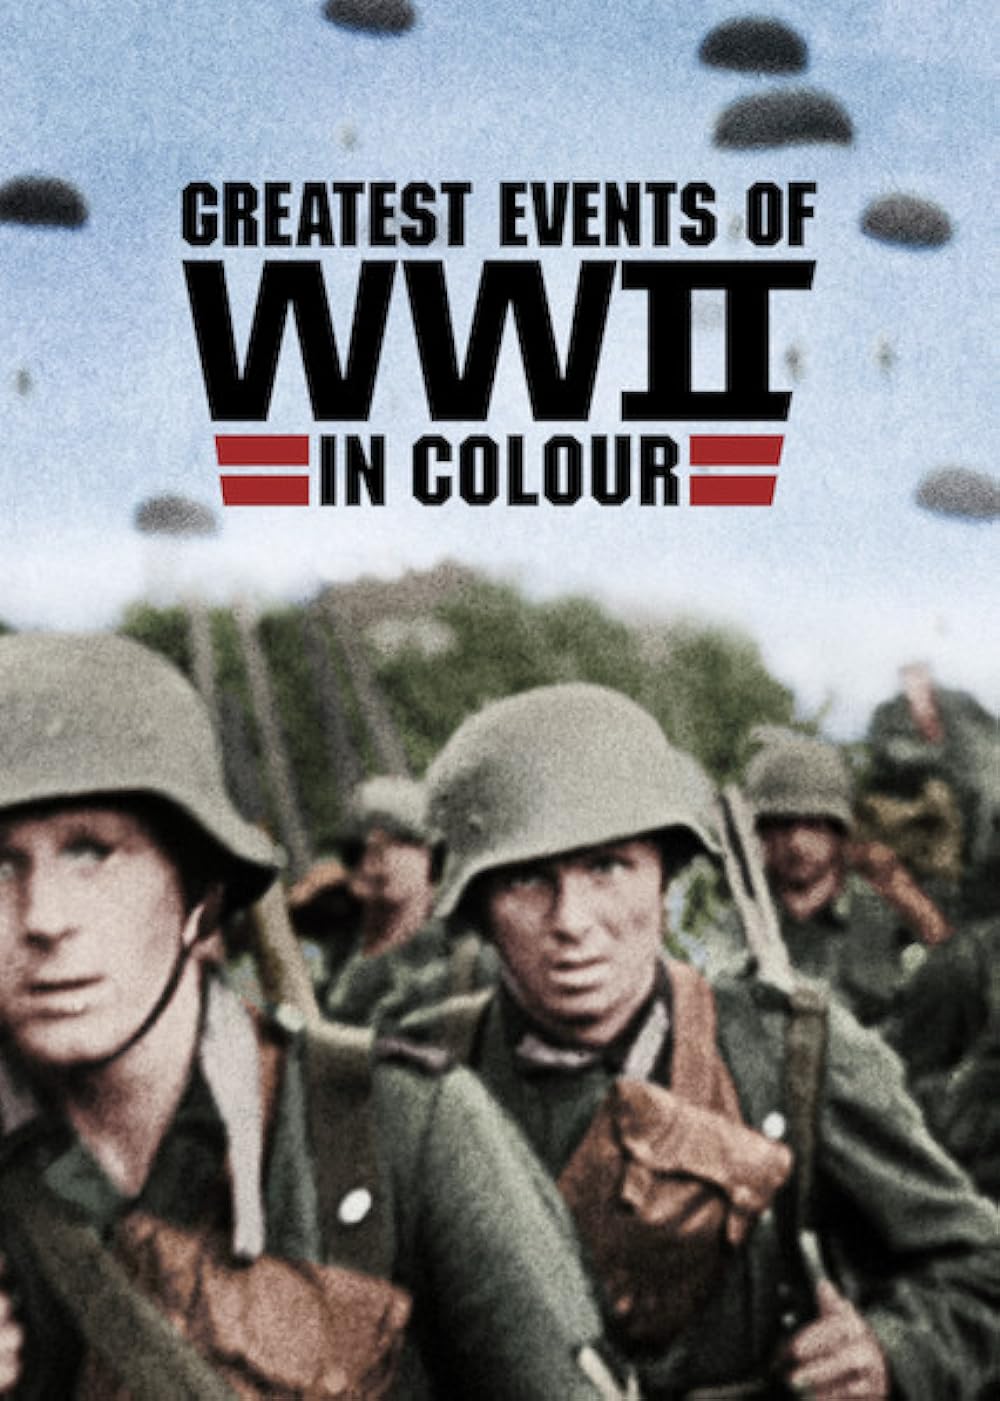 Greatest Events of WWII in Colour (2019) S1 EP2 Battle of Britain 128Kbps 25Fps 48Khz 2.0Ch DD+ NF E-AC3 Turkish Audio TAC